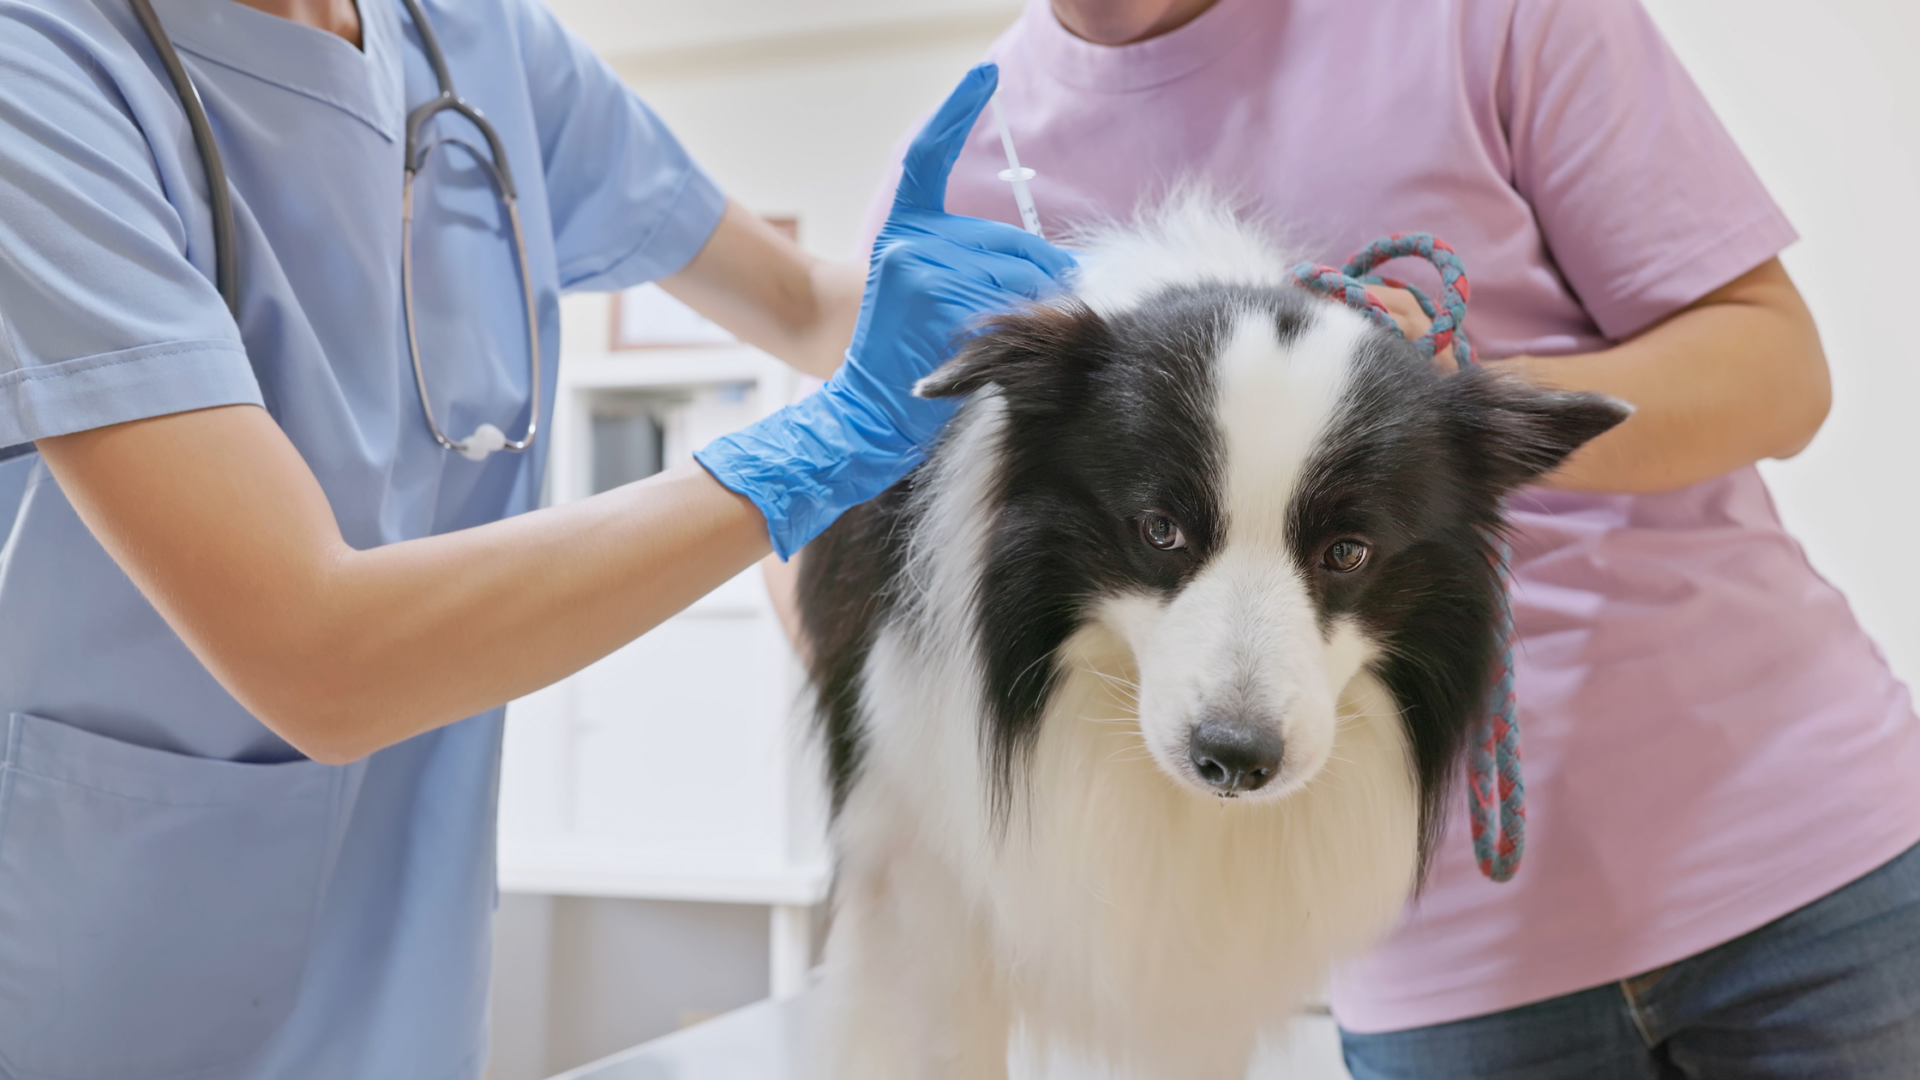 A dog getting a vaccination shot at the vet